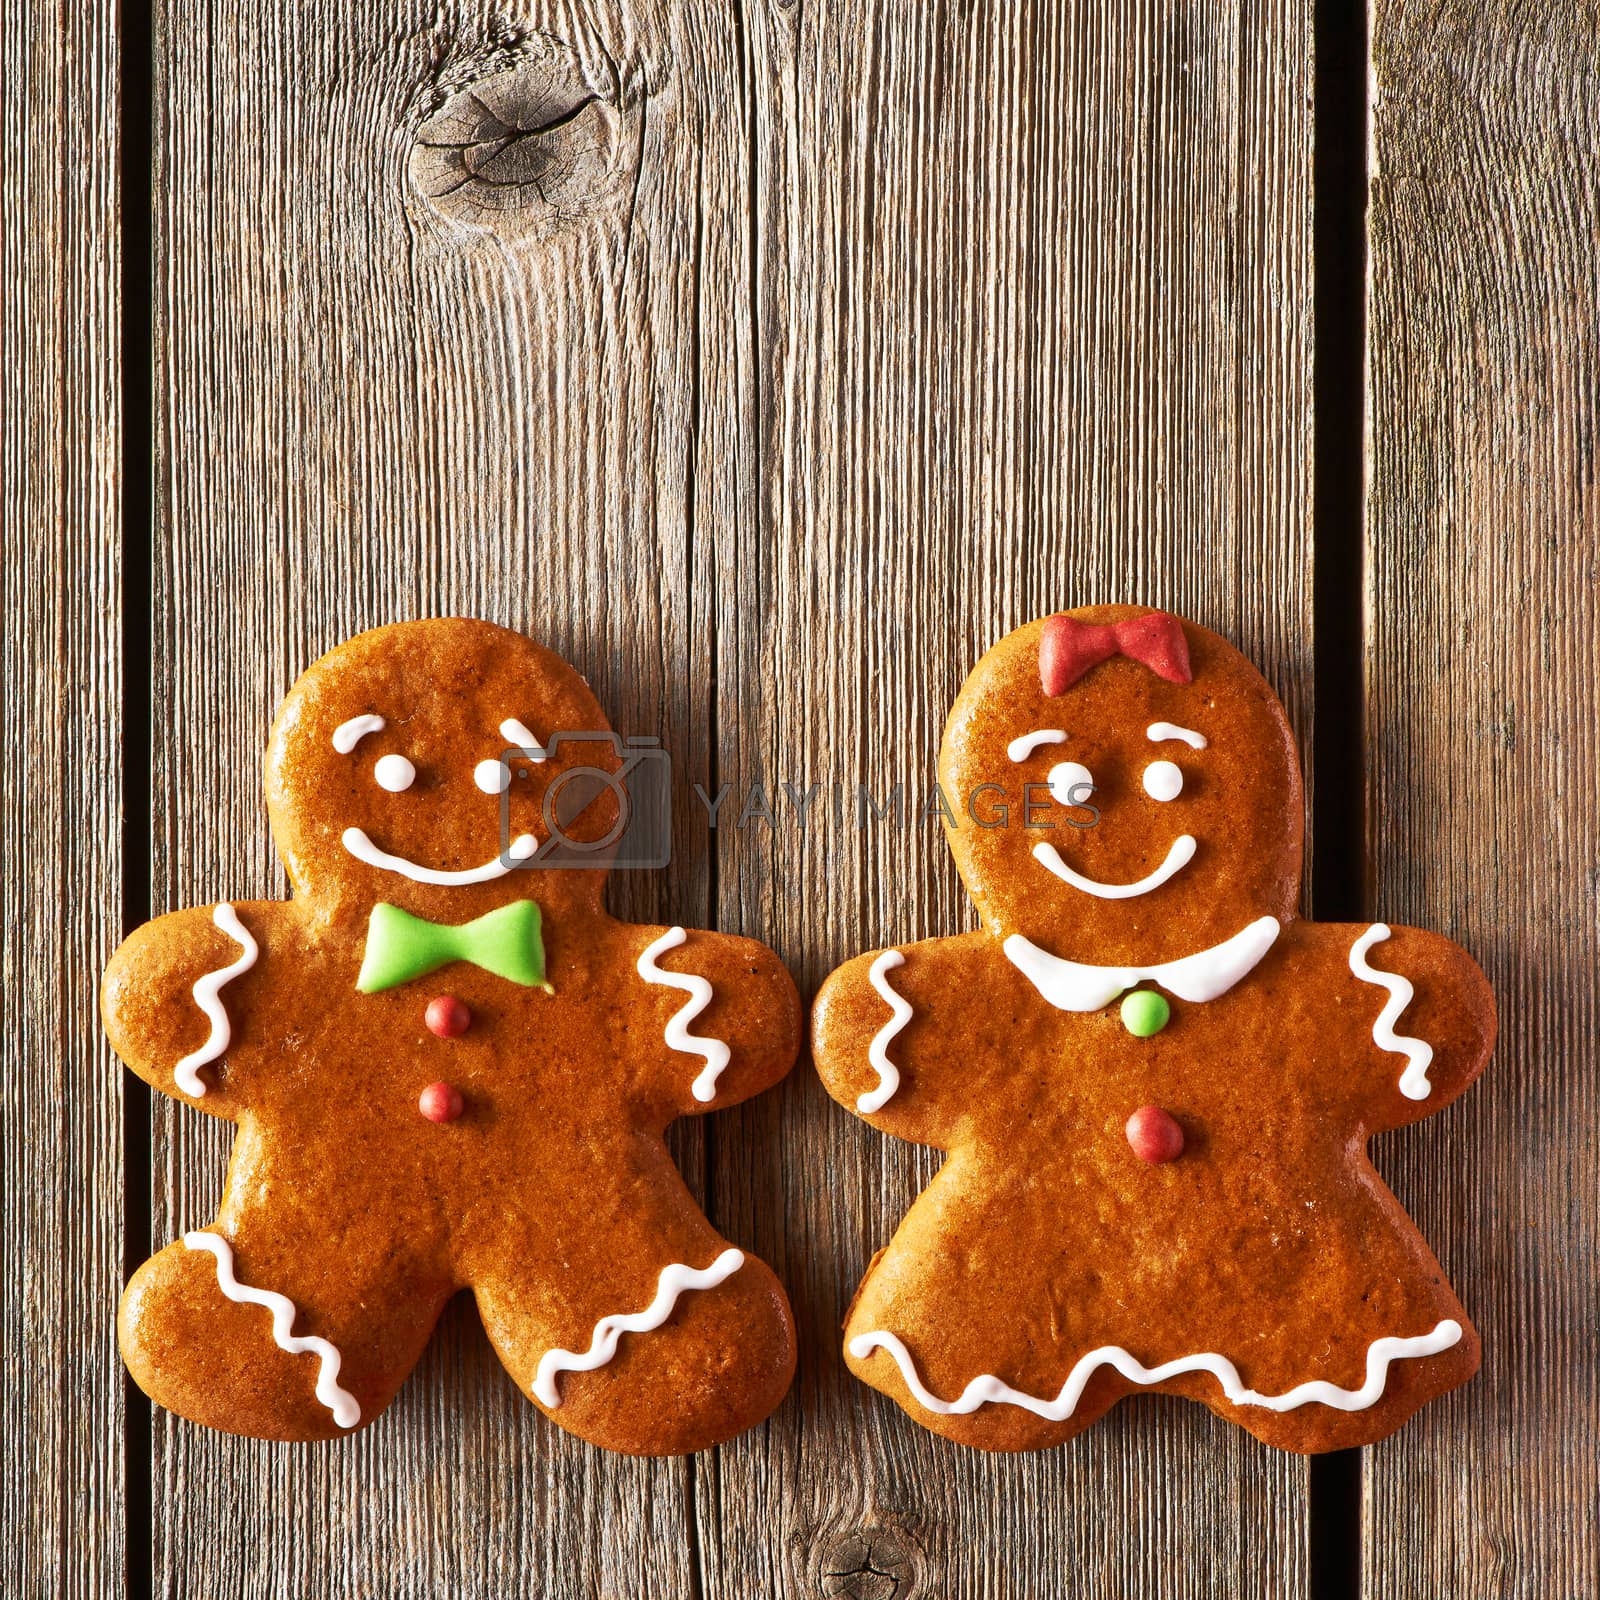 Royalty free image of Christmas homemade gingerbread couple cookies by haveseen